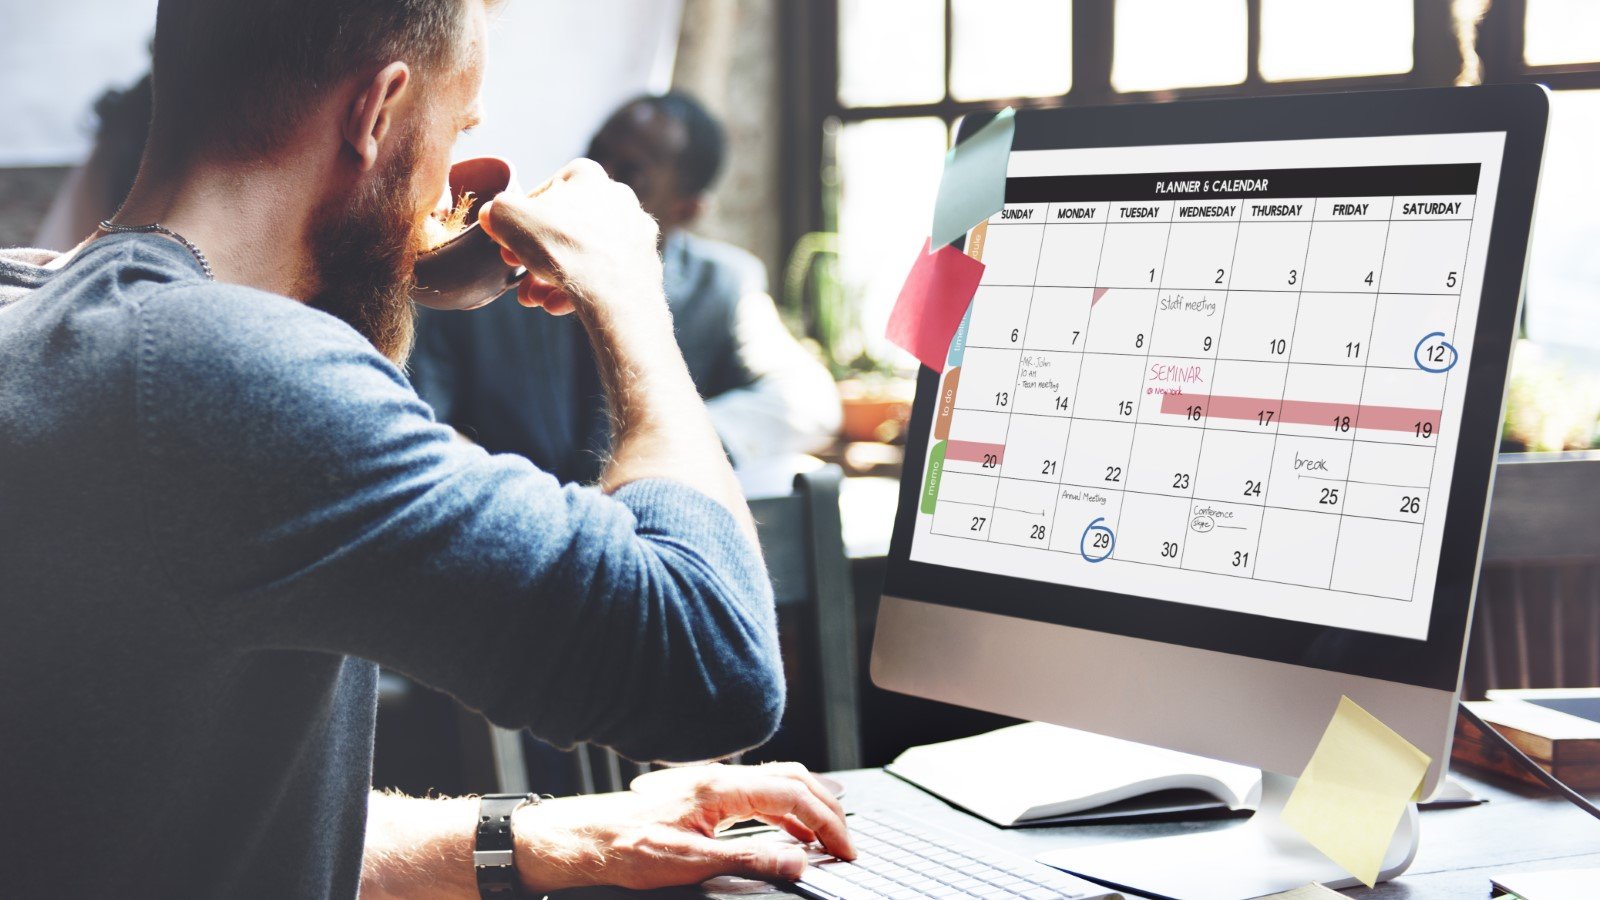 <p>Stop accumulating old planners. Instead, ritualize transferring important information into a new agenda every year. To reduce paper waste, use online resources like Notion, Google Calendar, and Trello to keep track of appointments and deadlines.</p>